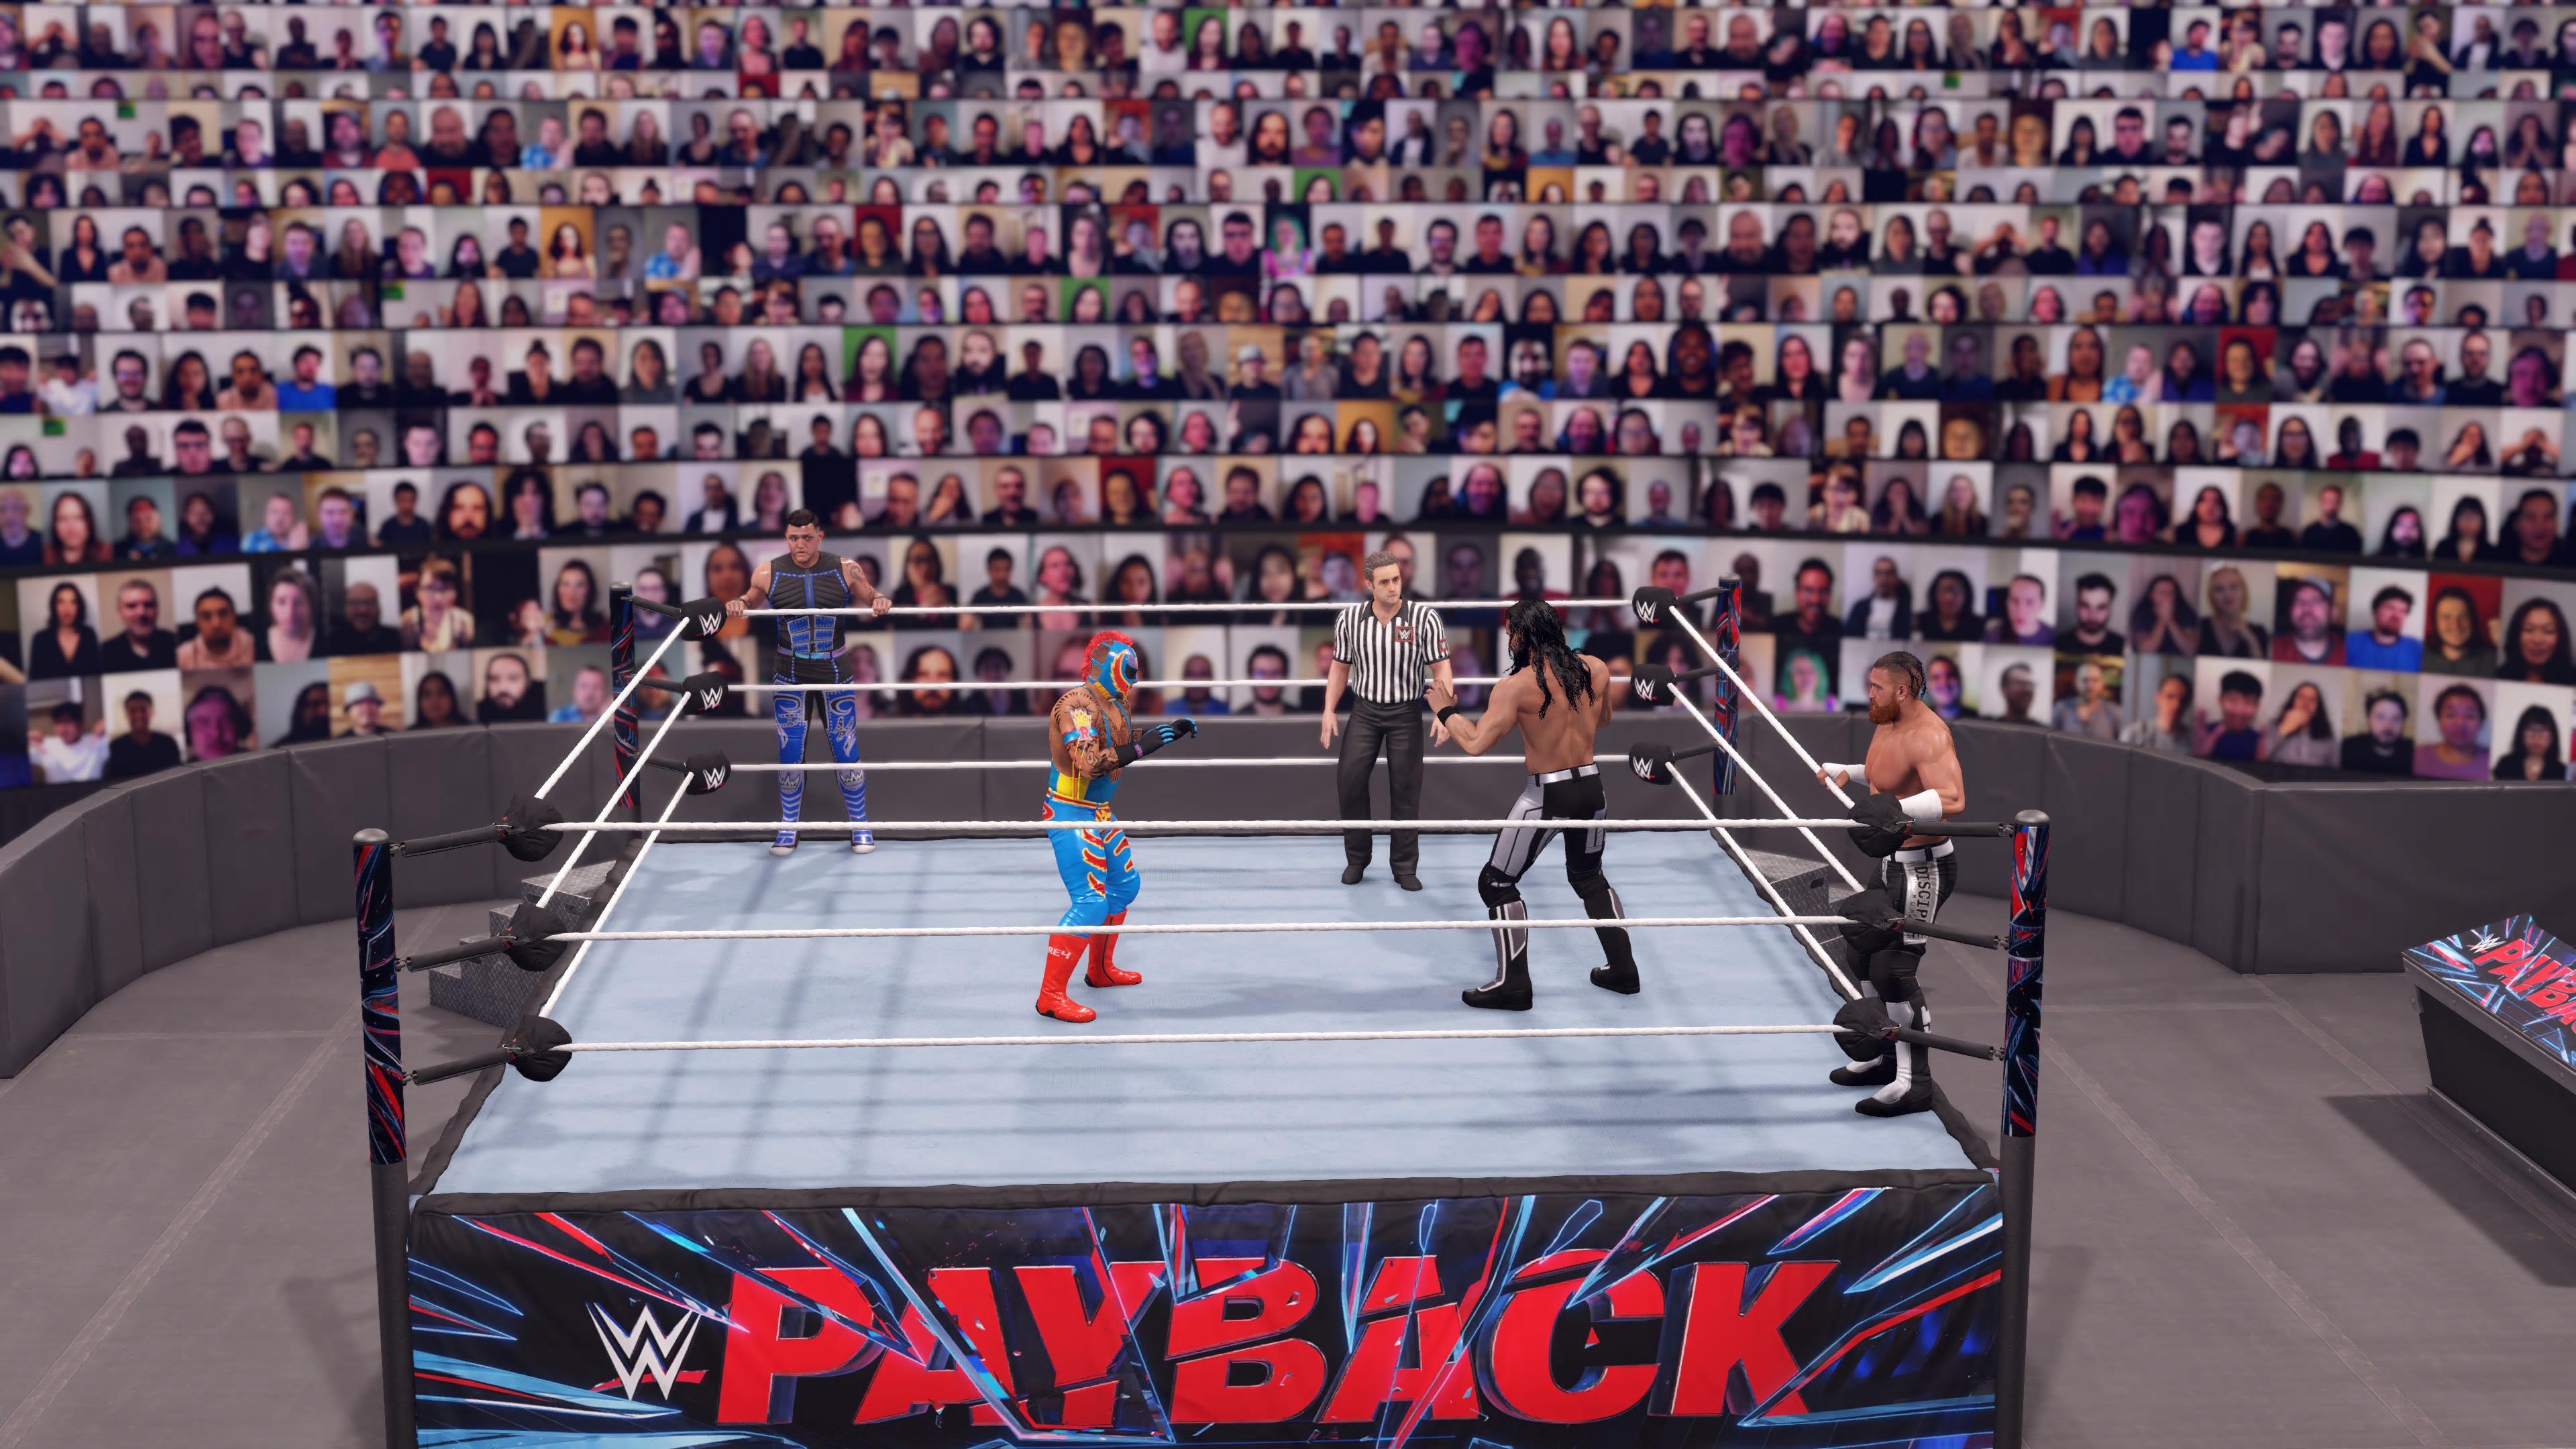 WWE 2K22 Review: New game modes and innovations revive a troubled franchise